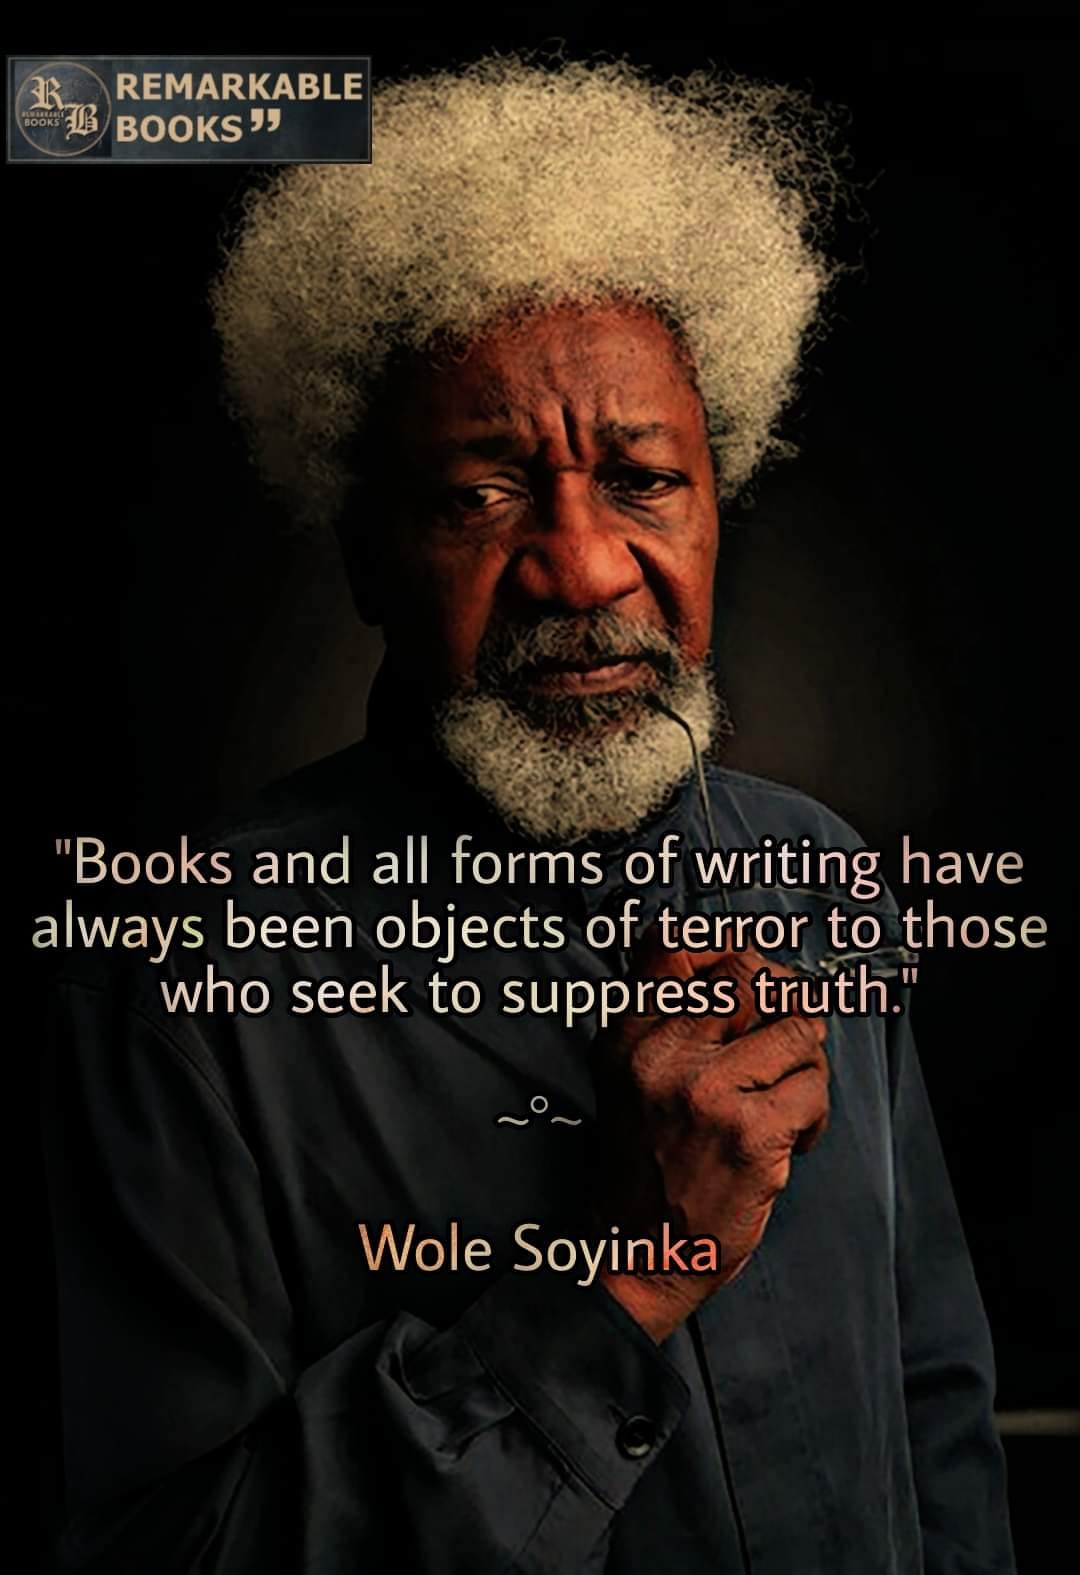 Books and all forms of writing are terror to those who wish to suppress the truth. Wole Soyinka